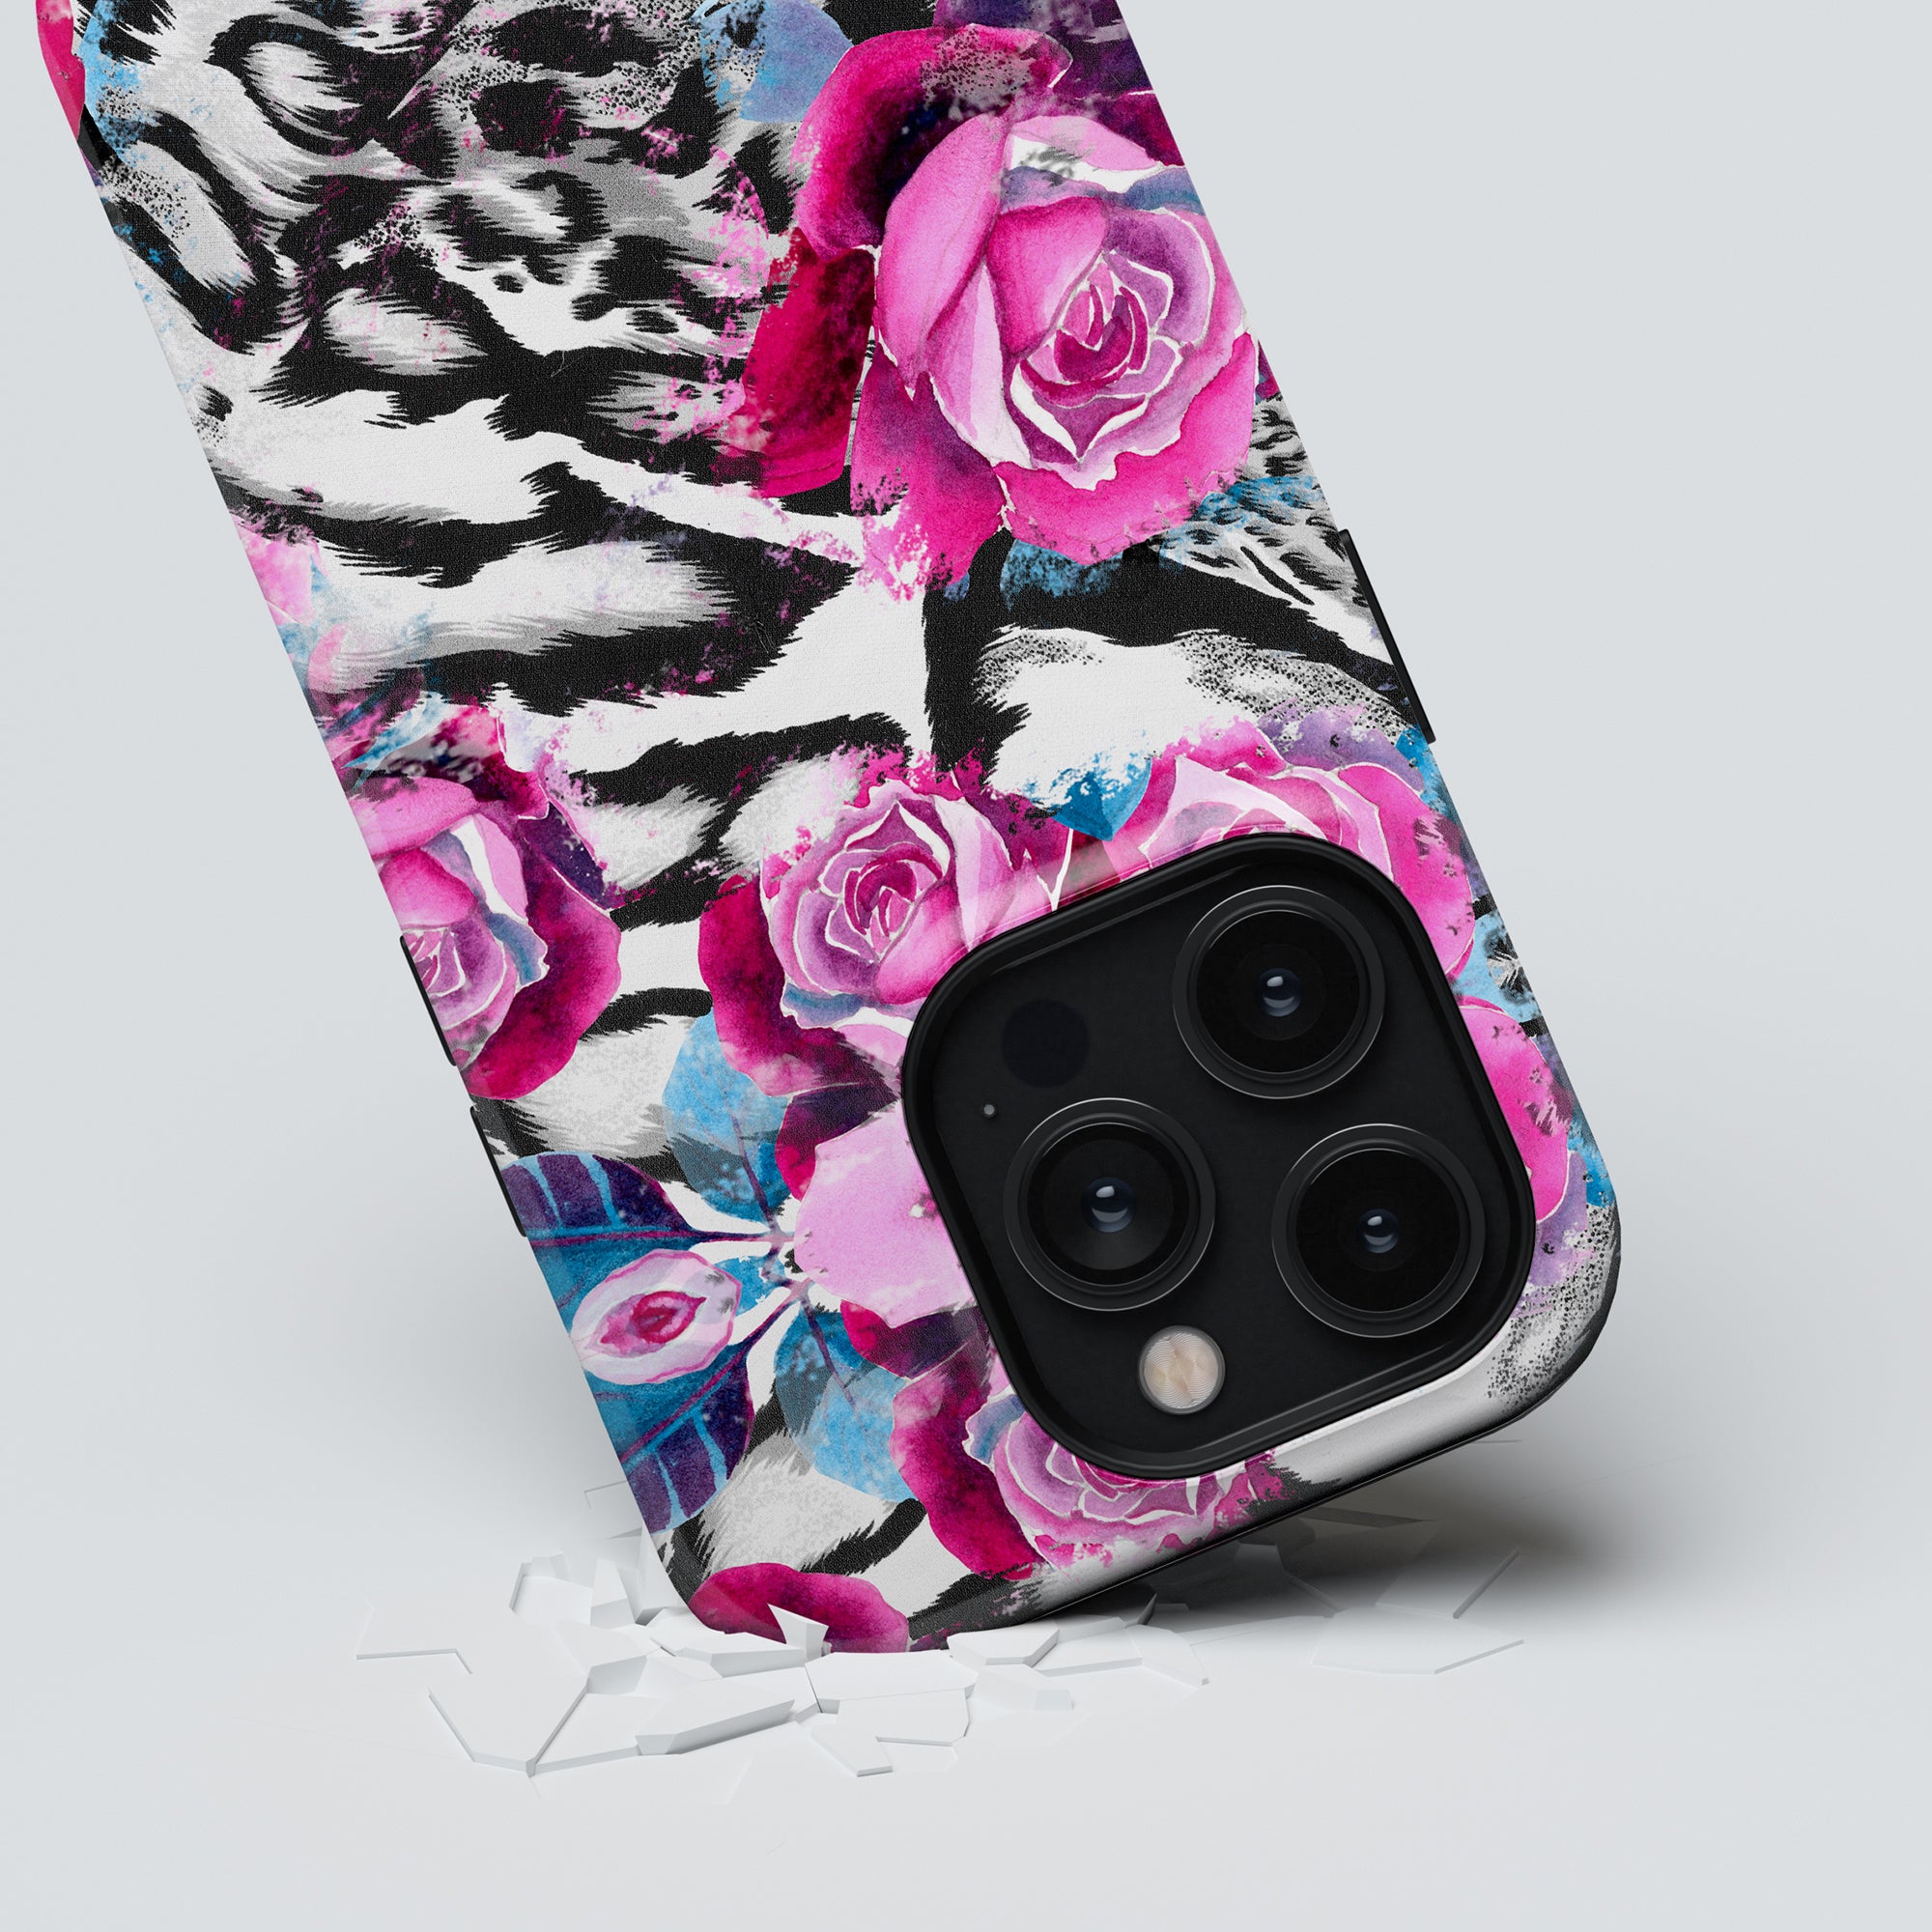 Smartphone with a Rosy Wildcat - Tough Case, featuring a large camera lens, lying on a white surface with broken glass fragments.